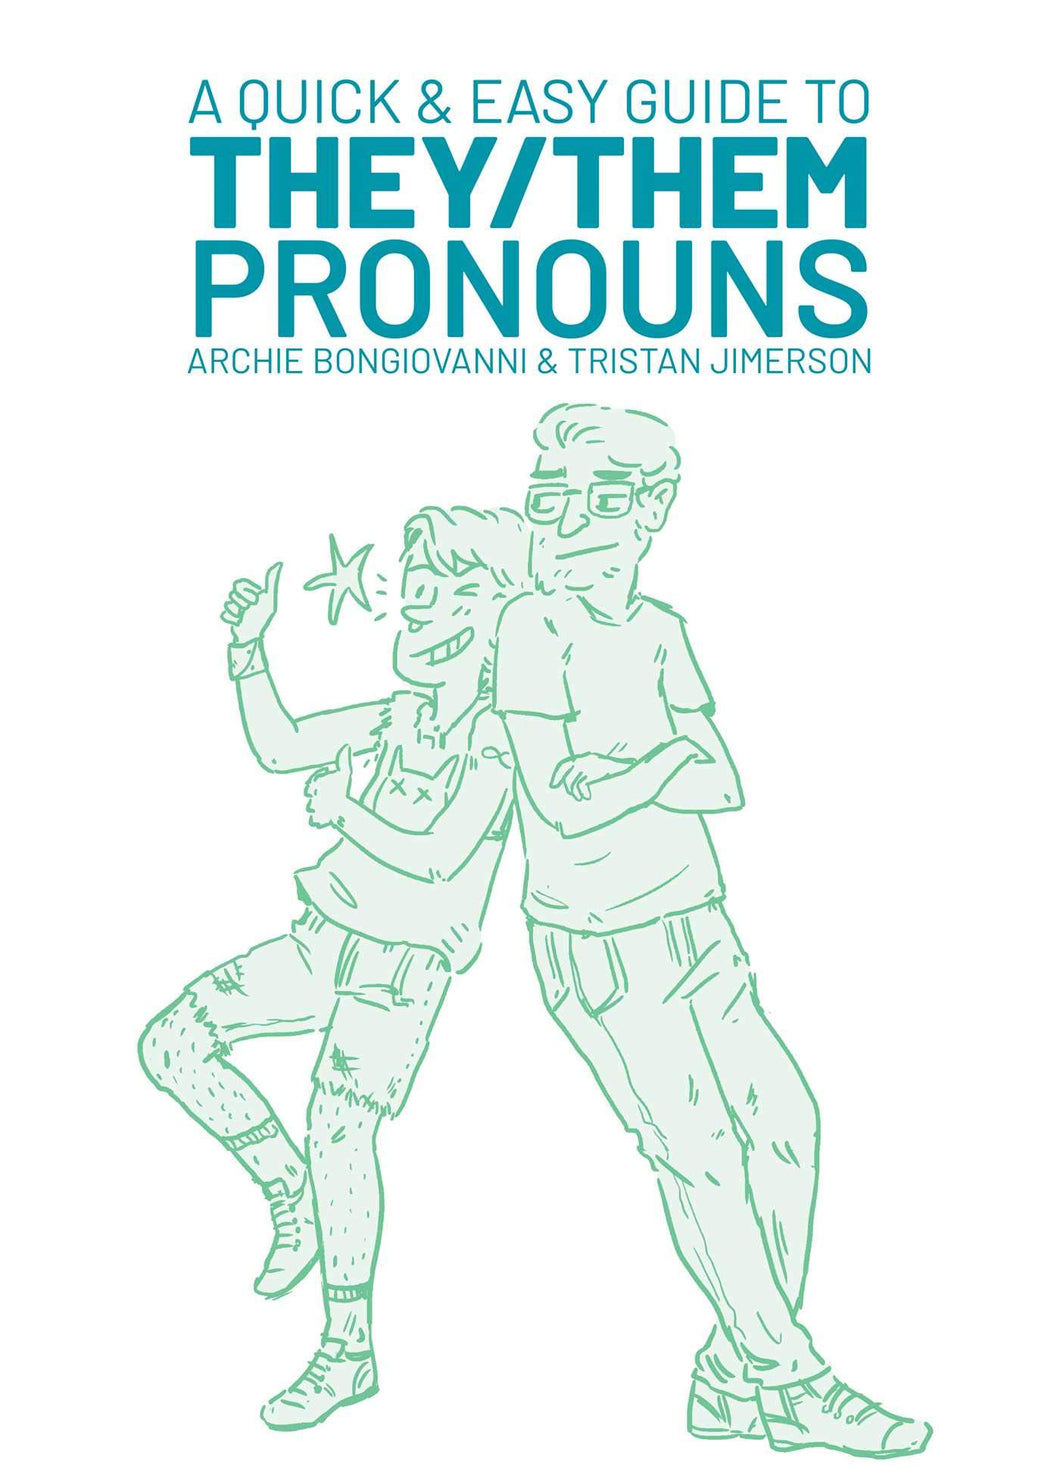 A Quick & Easy Guide to They/Them Pronouns by Archie Bongiovanni, Tristan Jimerson